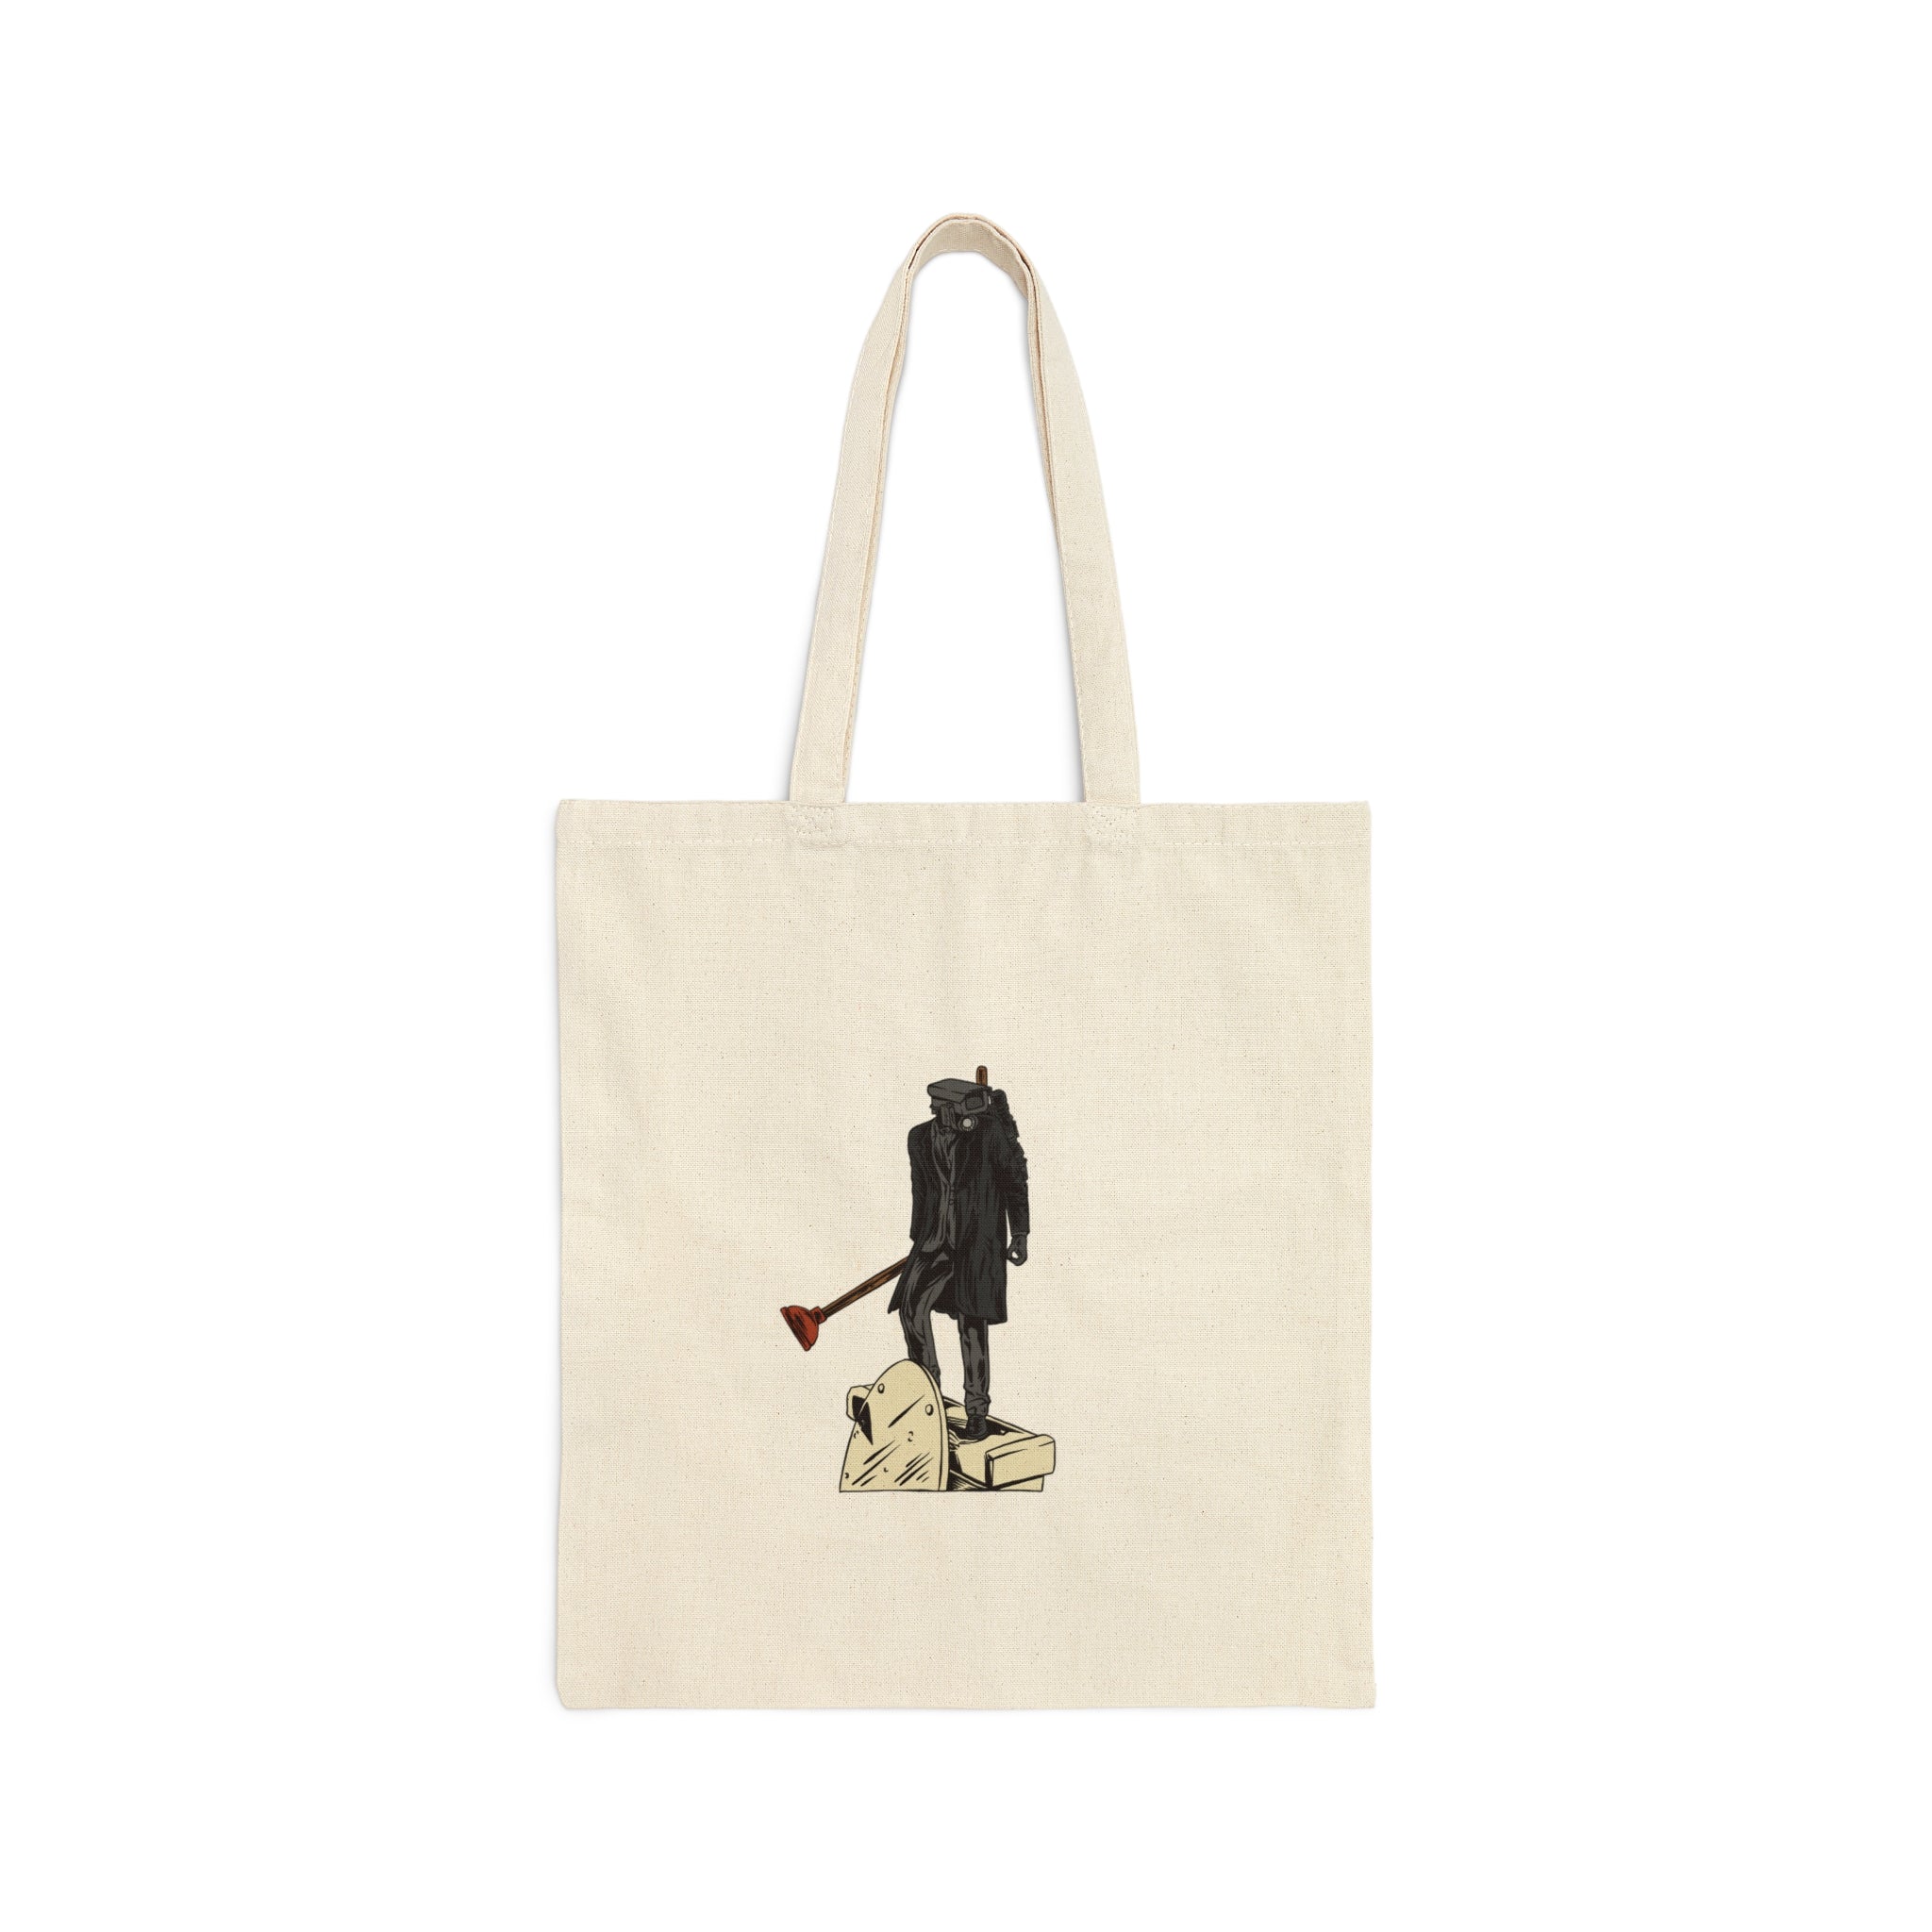 Sole Plunger Tote Bag Plungerman on natural cotton tote bag white background